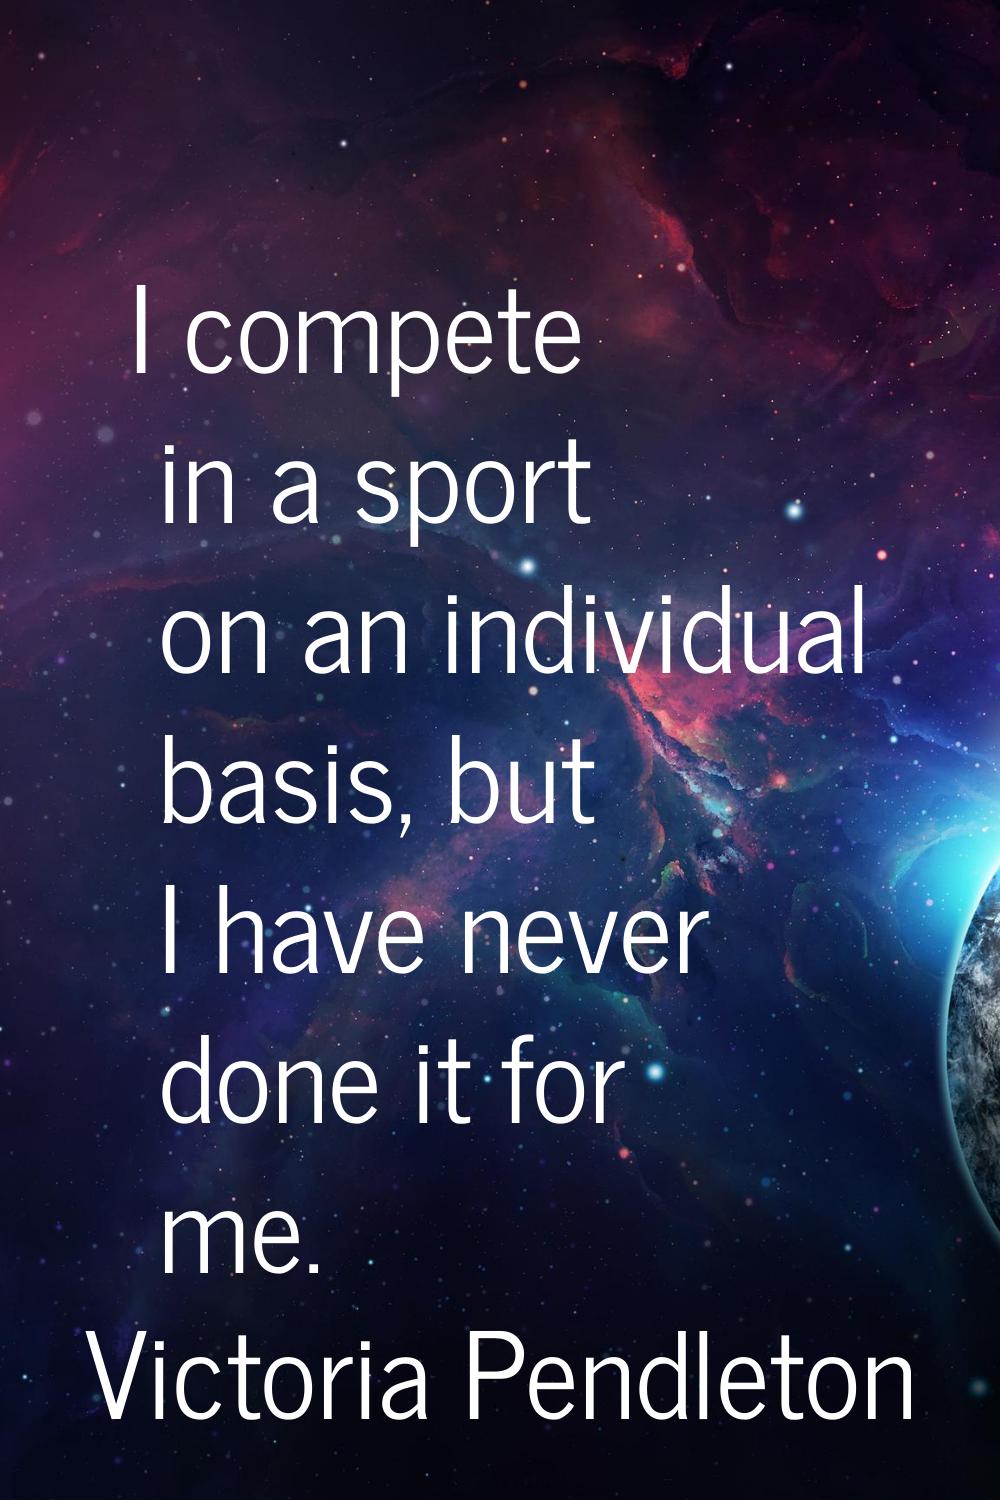 I compete in a sport on an individual basis, but I have never done it for me.